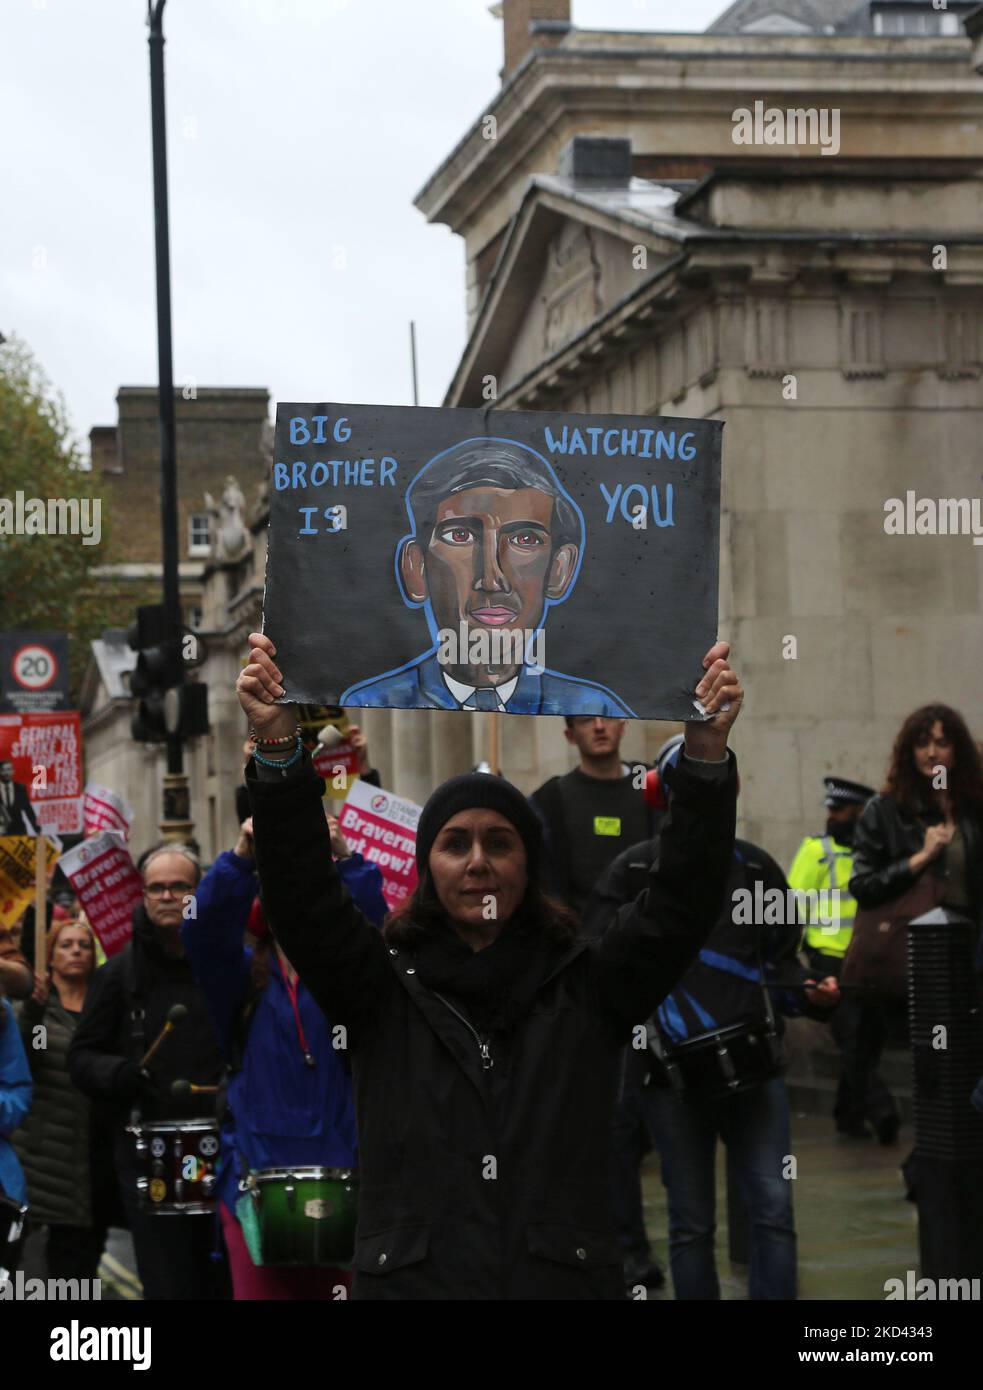 Protesters march through central London, past Westminster and Downing Street, protesting the cost of living crisis and calling for a general election. The protest has been labelled 'Britain is Broken' November 5th 2022 Copyright Anna Hatfield Stock Photo